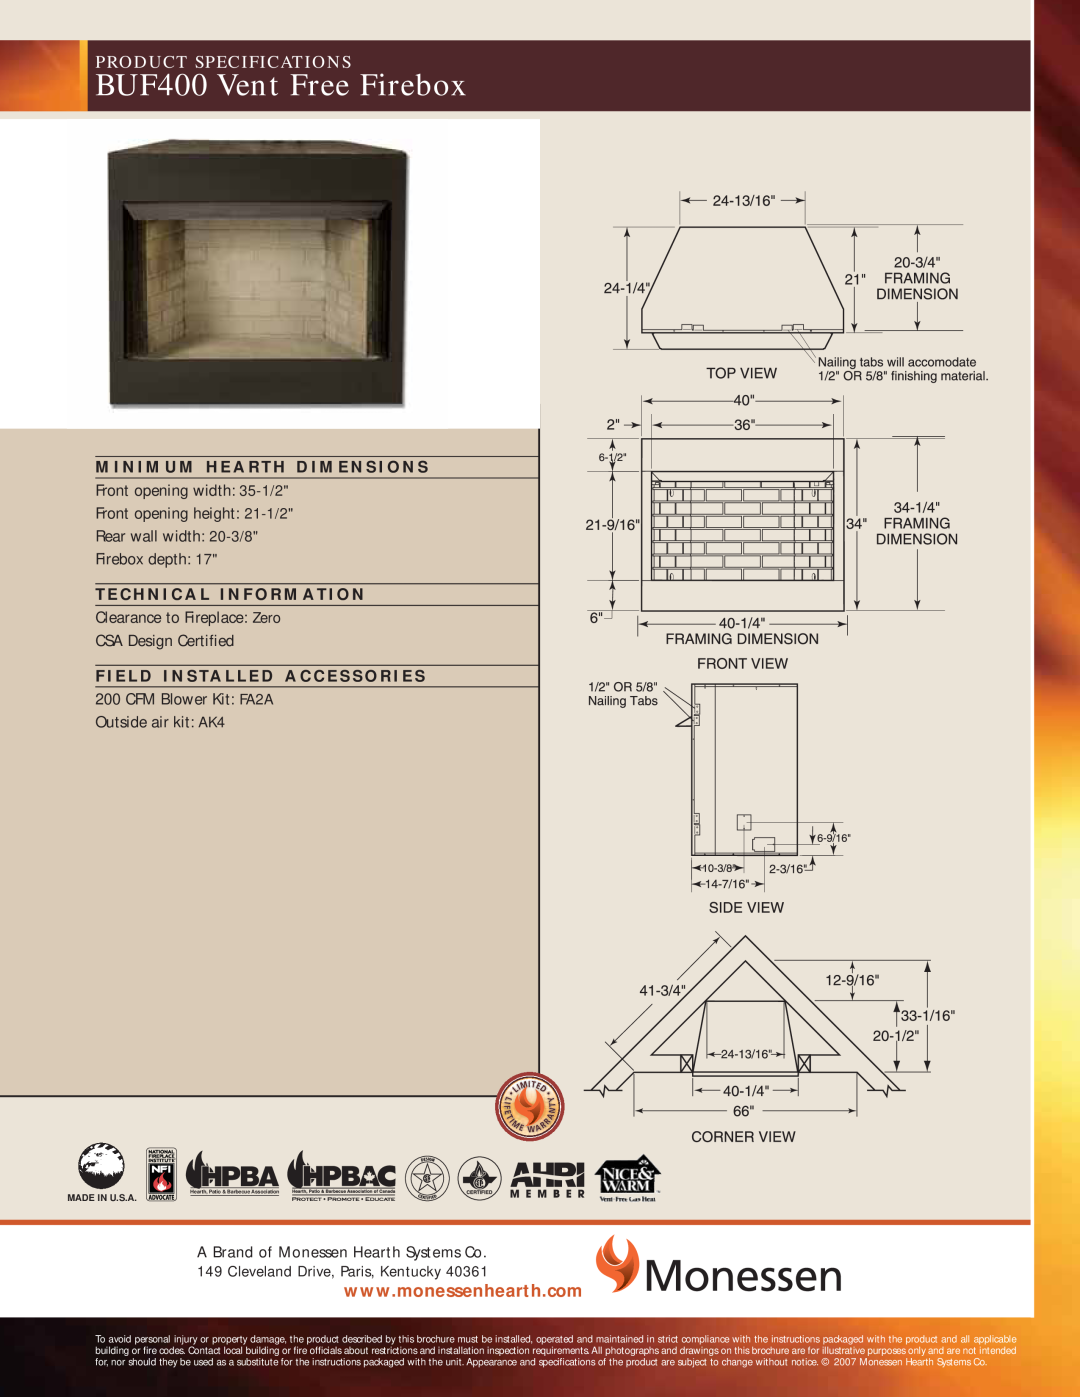 Monessen Hearth specifications BUF400 Vent Free Firebox, Product Specifications, Front opening width 35-1/2 